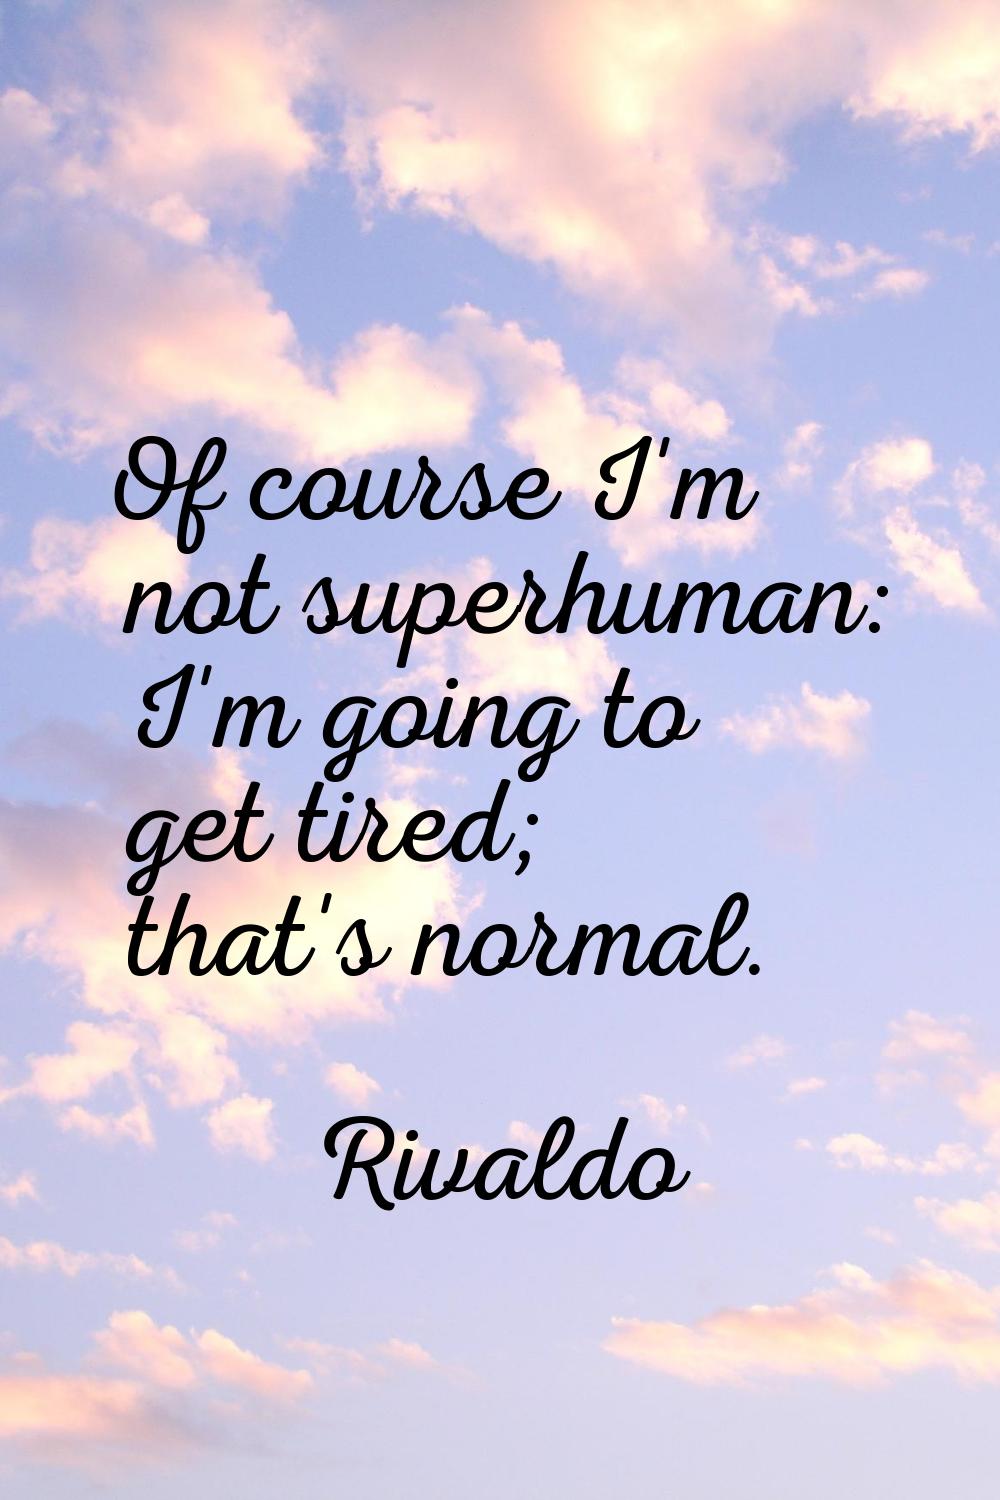 Of course I'm not superhuman: I'm going to get tired; that's normal.